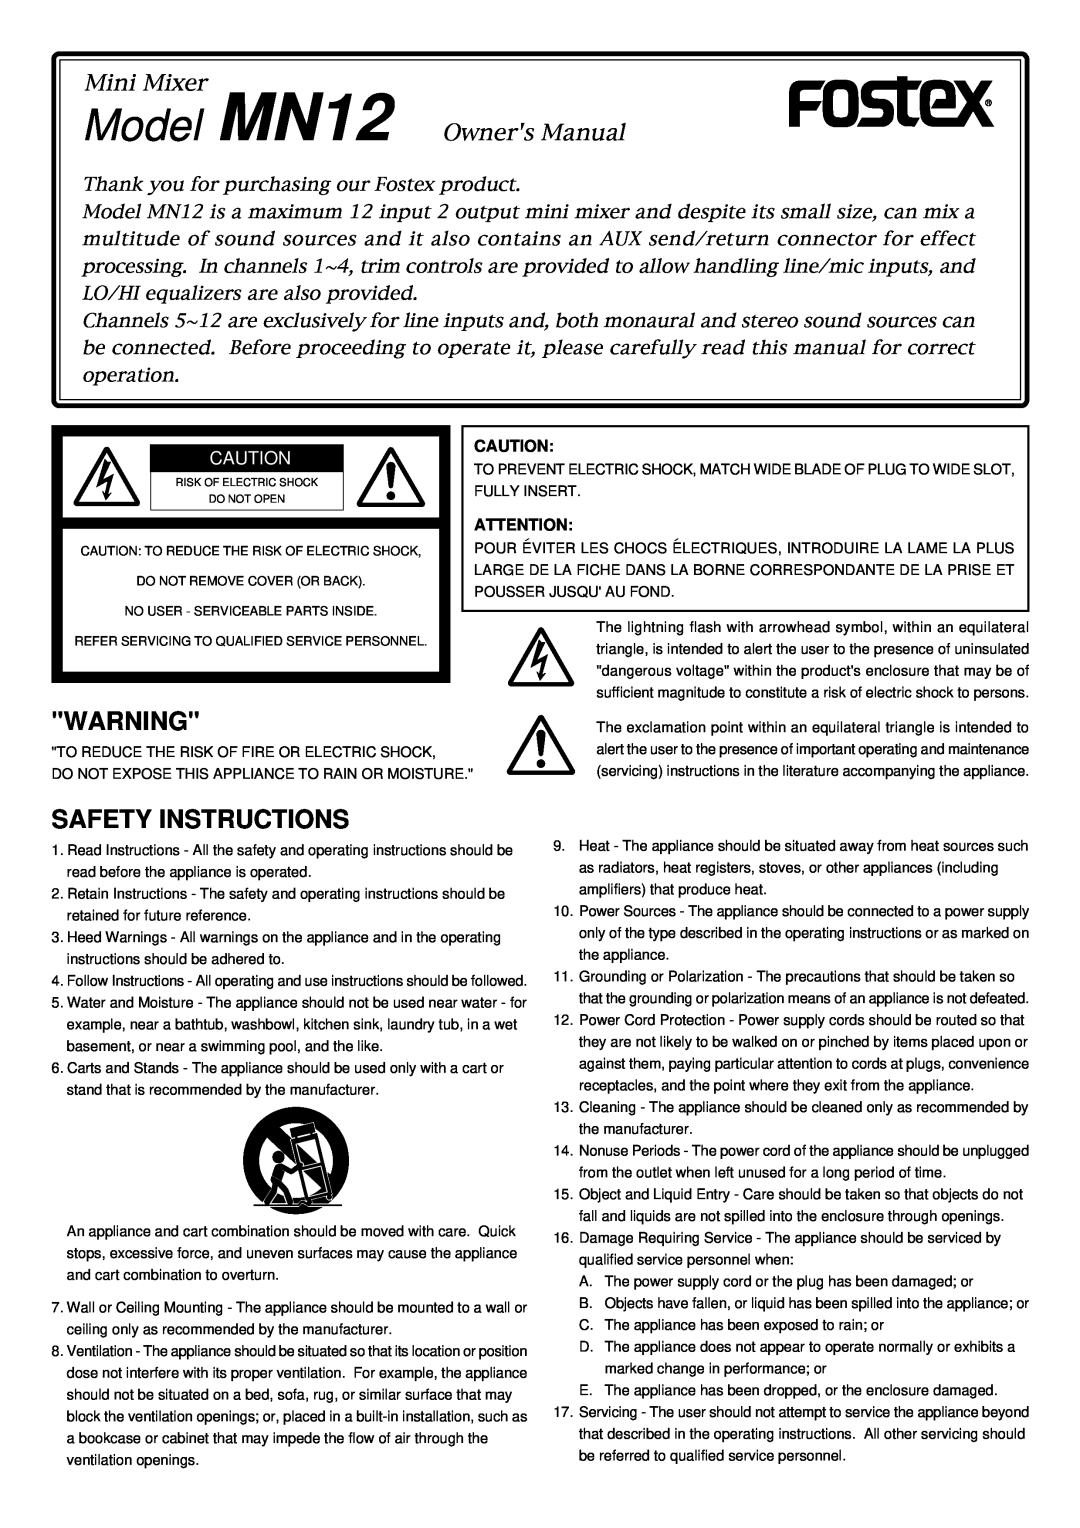 Fostex MN12 owner manual Safety Instructions 